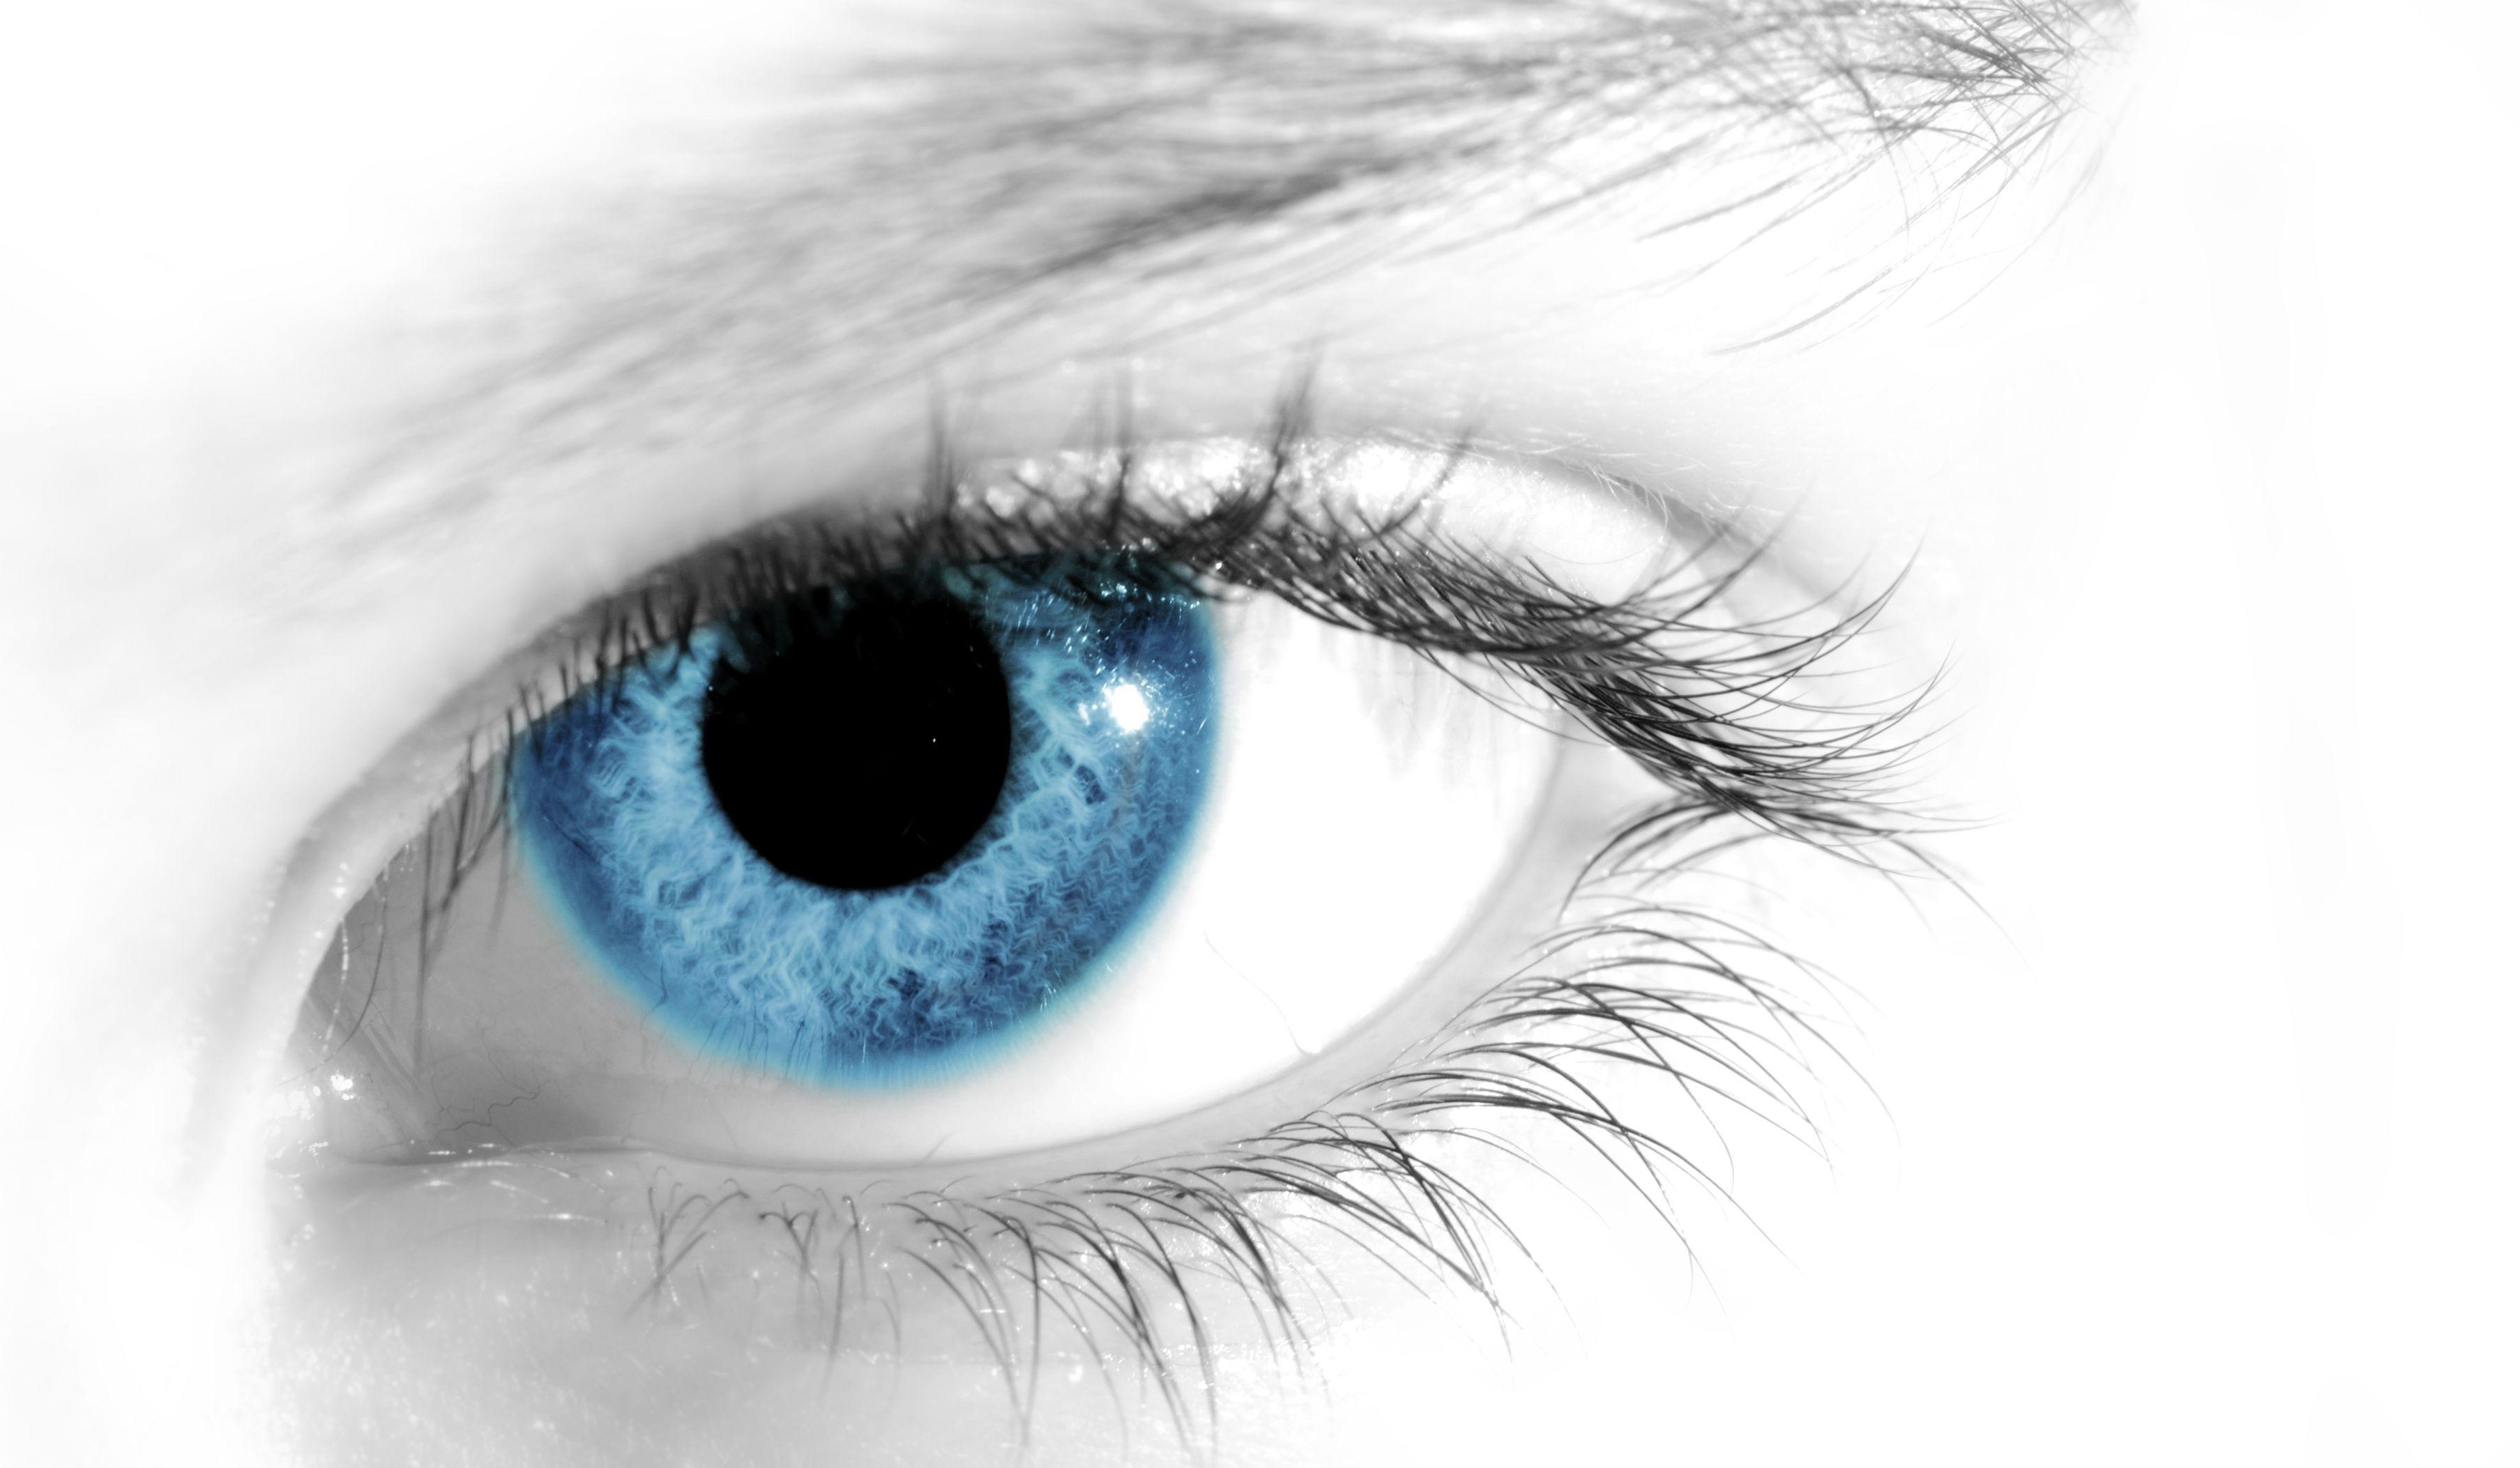 Eyeball Images Browse 178052 Stock Photos  Vectors Free Download with  Trial  Shutterstock